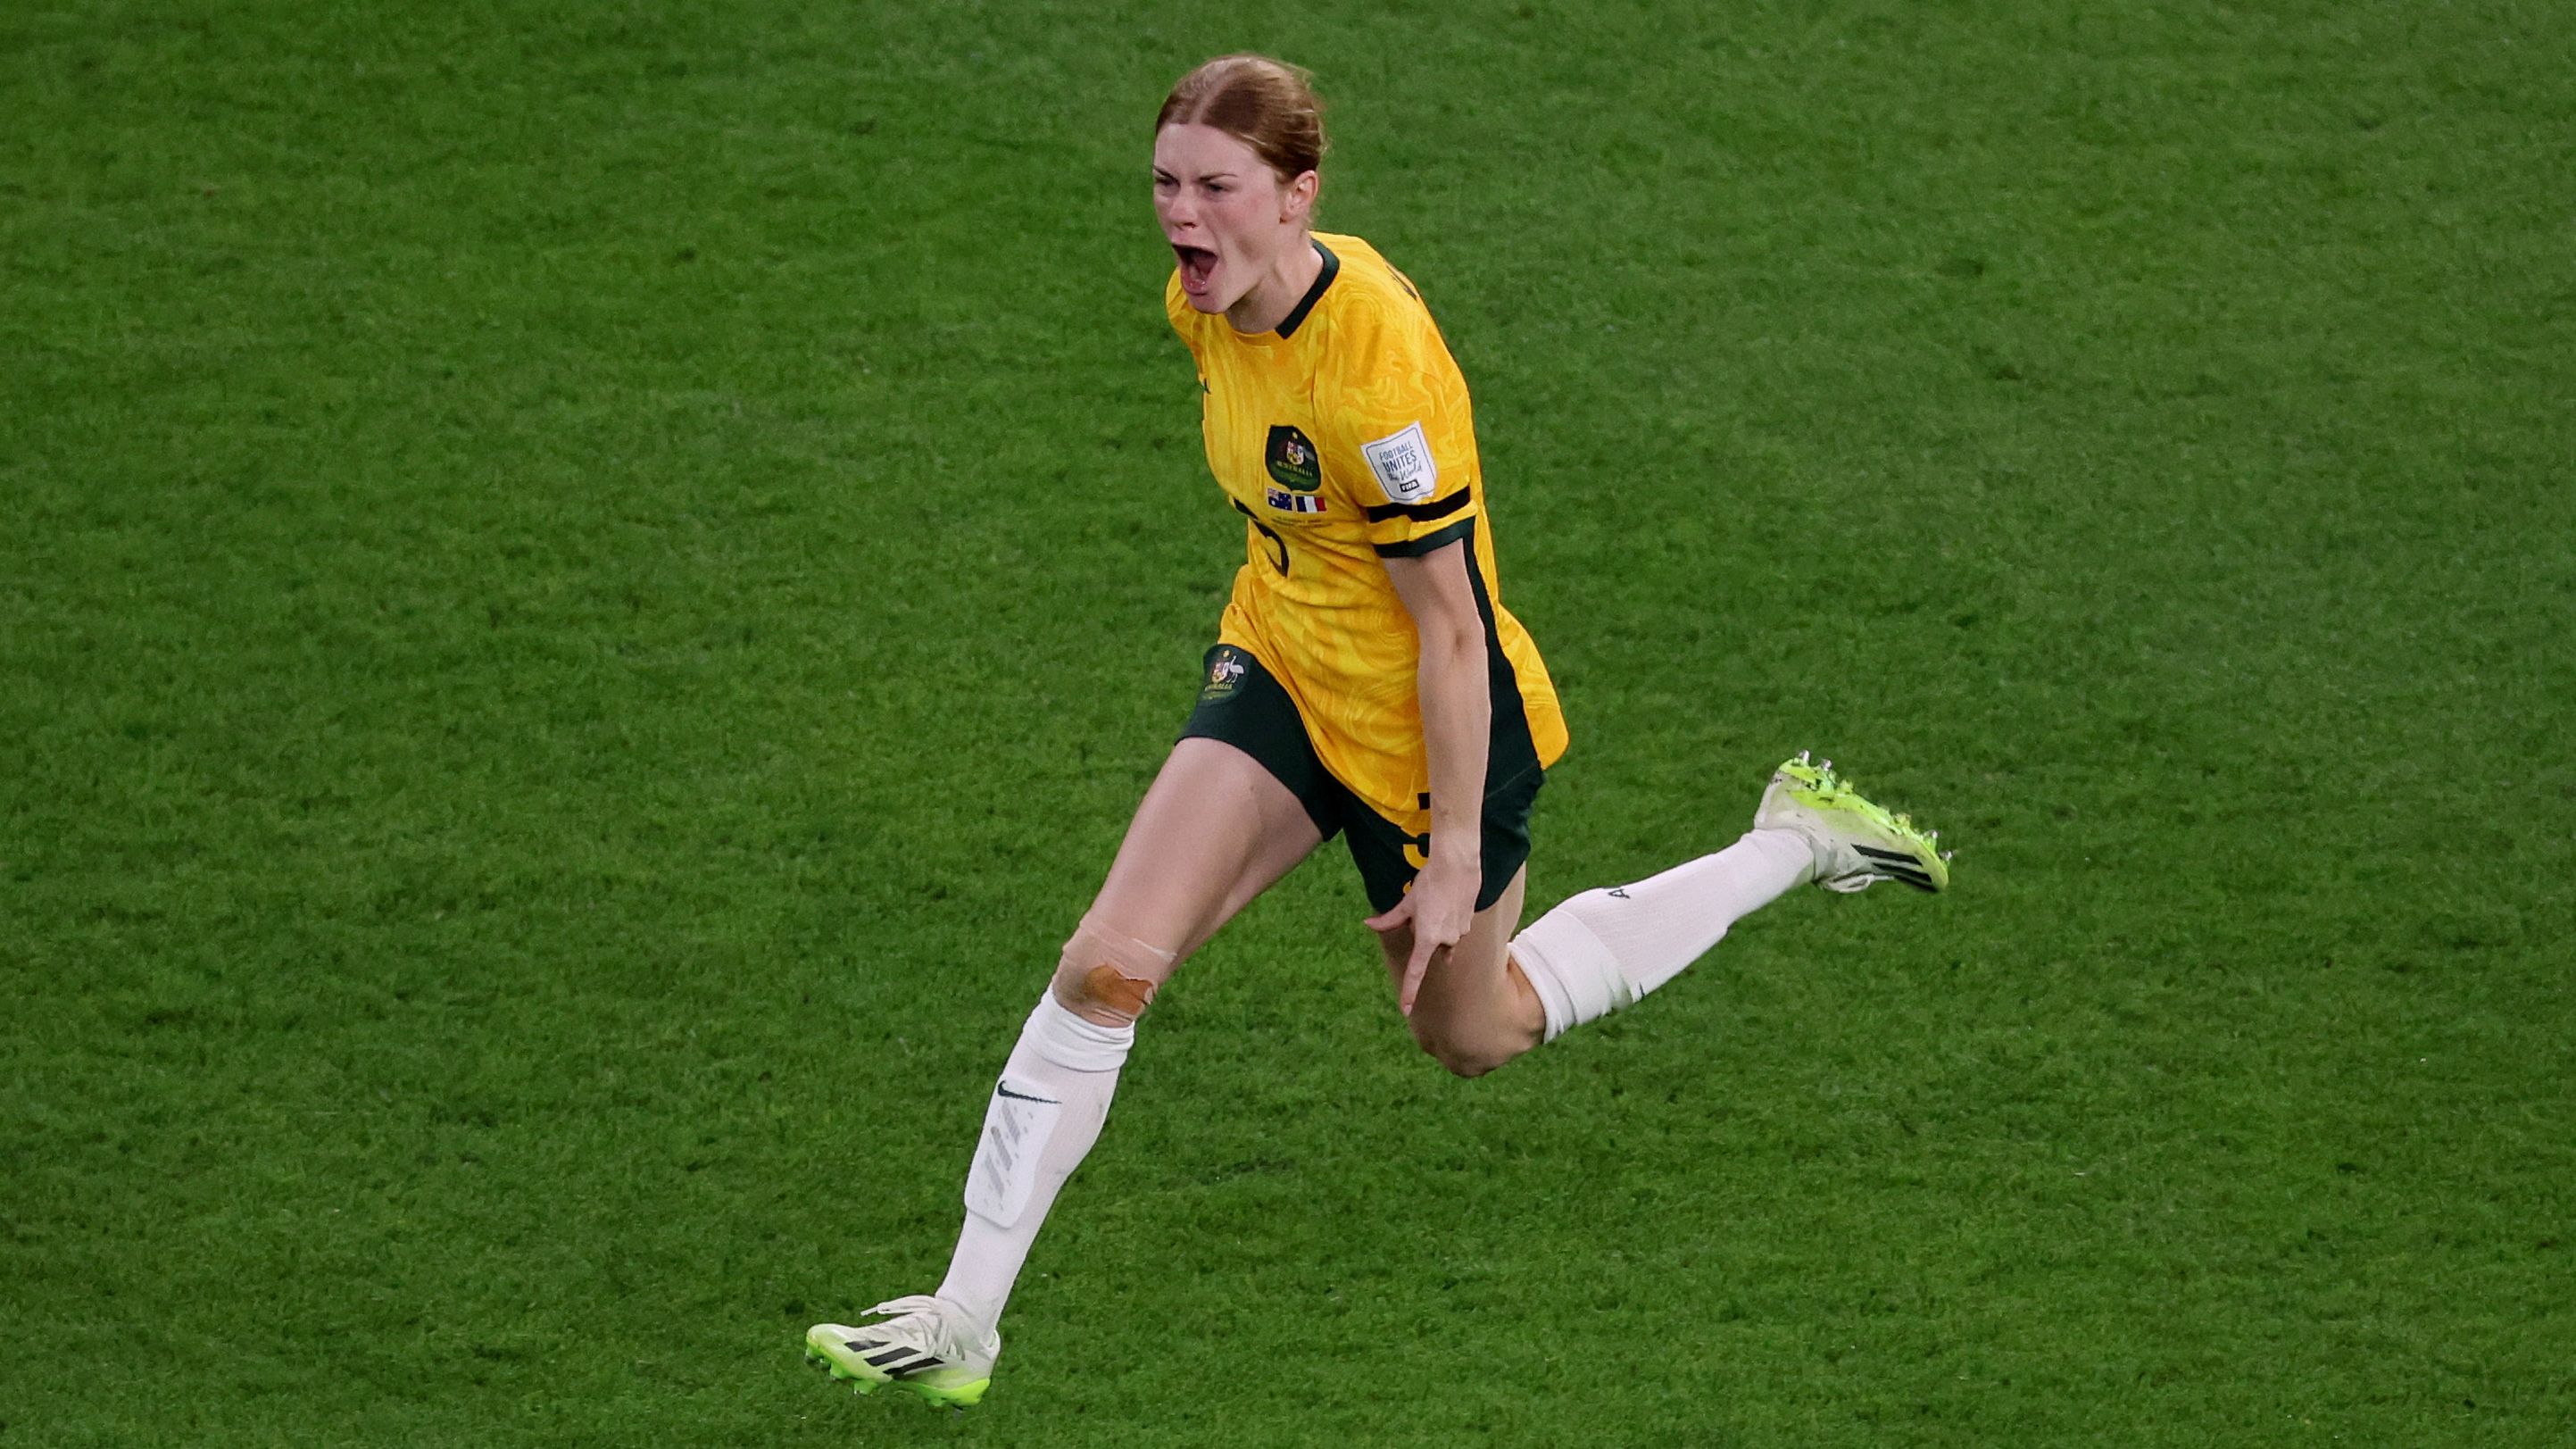 Australia&#x27;s Cortnee Vine celebrates scoring a penalty for Australia&#x27;s Matildas during the penalty shootout and progressing to the semi finals of the FIFA Women&#x27;s World Cup.